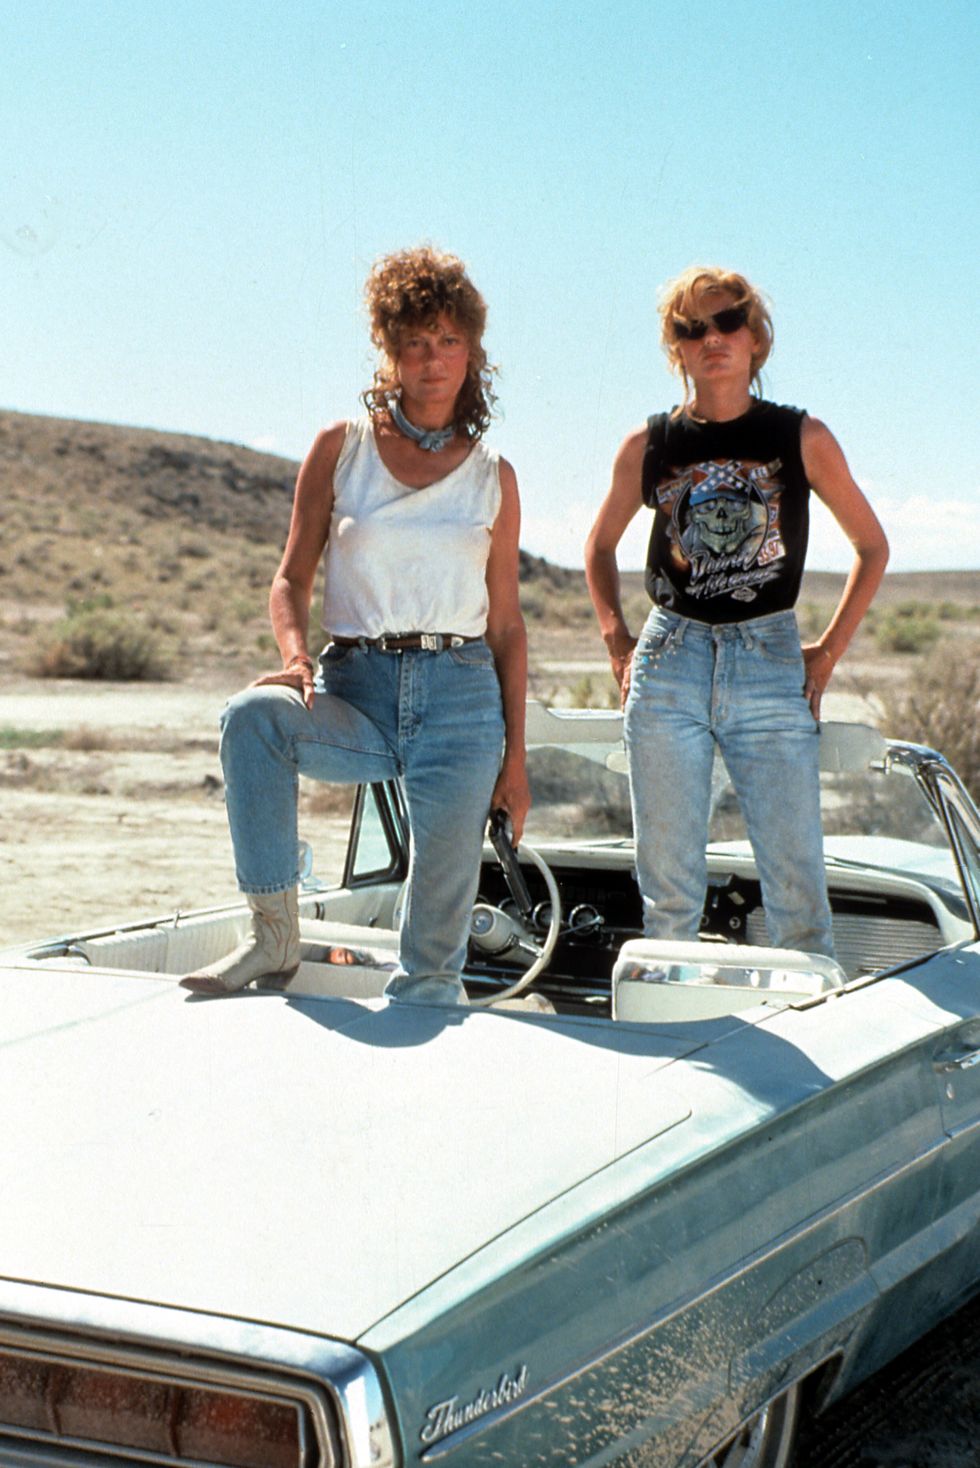 susan sarandon and geena davis standing in the convertible in publicity portrait for the film thelma louise, 1991 photo by metro goldwyn mayergetty images susan sarandon and geena davis in thelma and louise